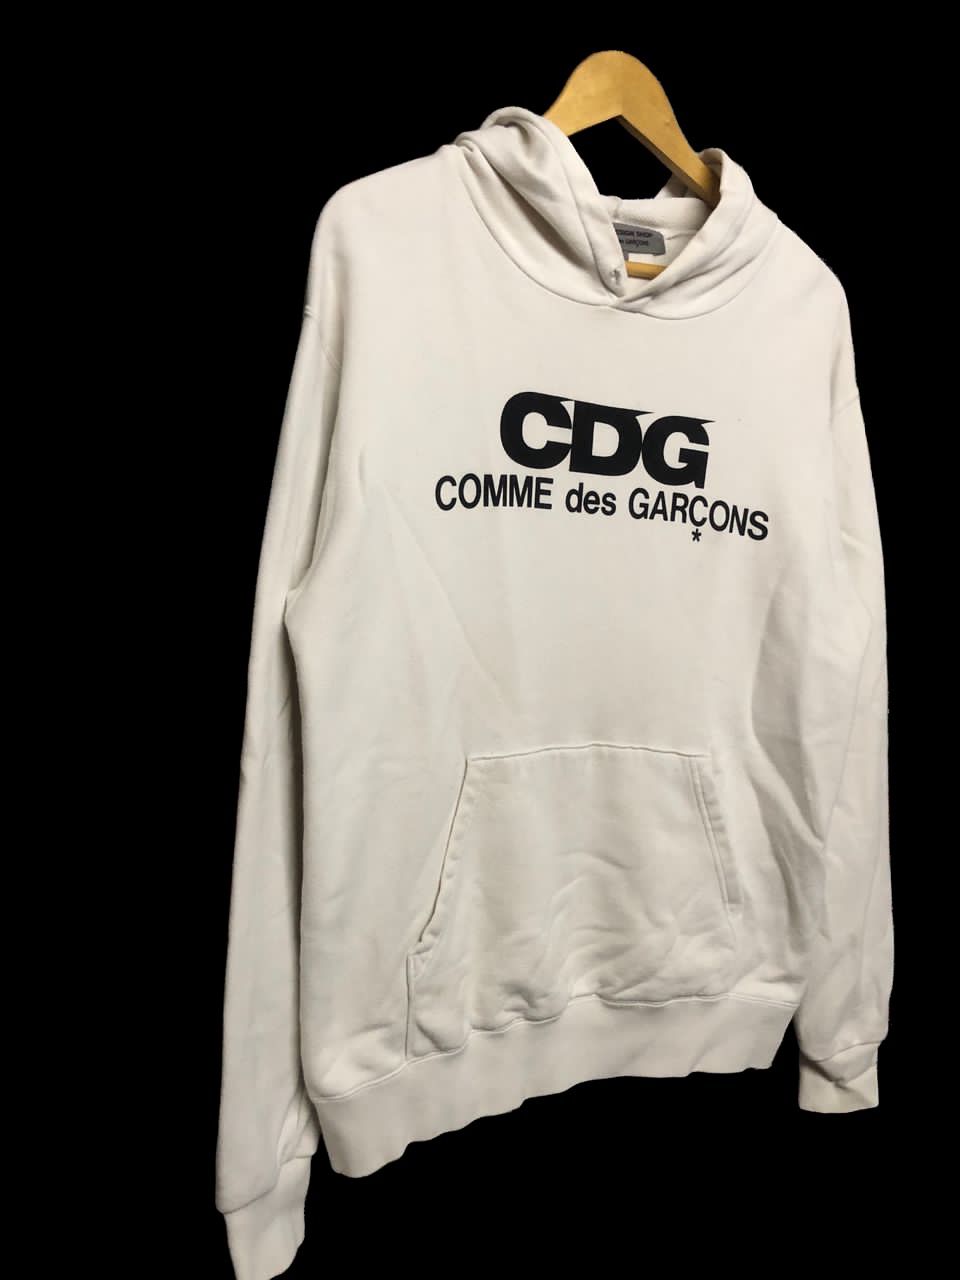 AD2016🔥Cdg X Good Shop Design Spellout Pullover Hoodies - 5